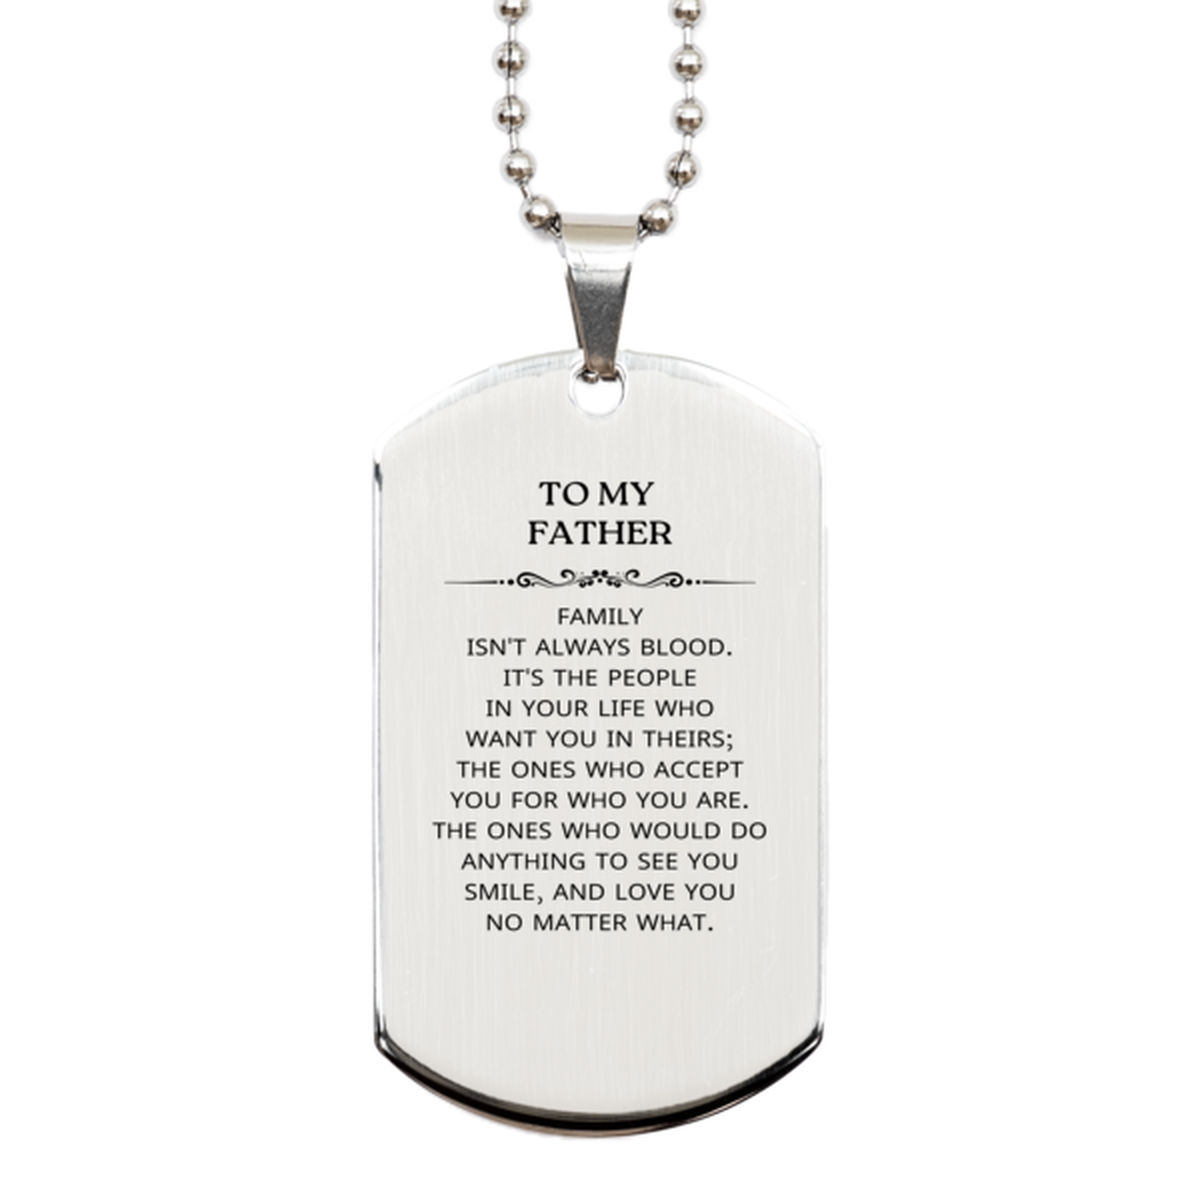 To My Father Gifts, Family isn't always blood, Father Silver Dog Tag, Birthday Christmas Unique Present For Father